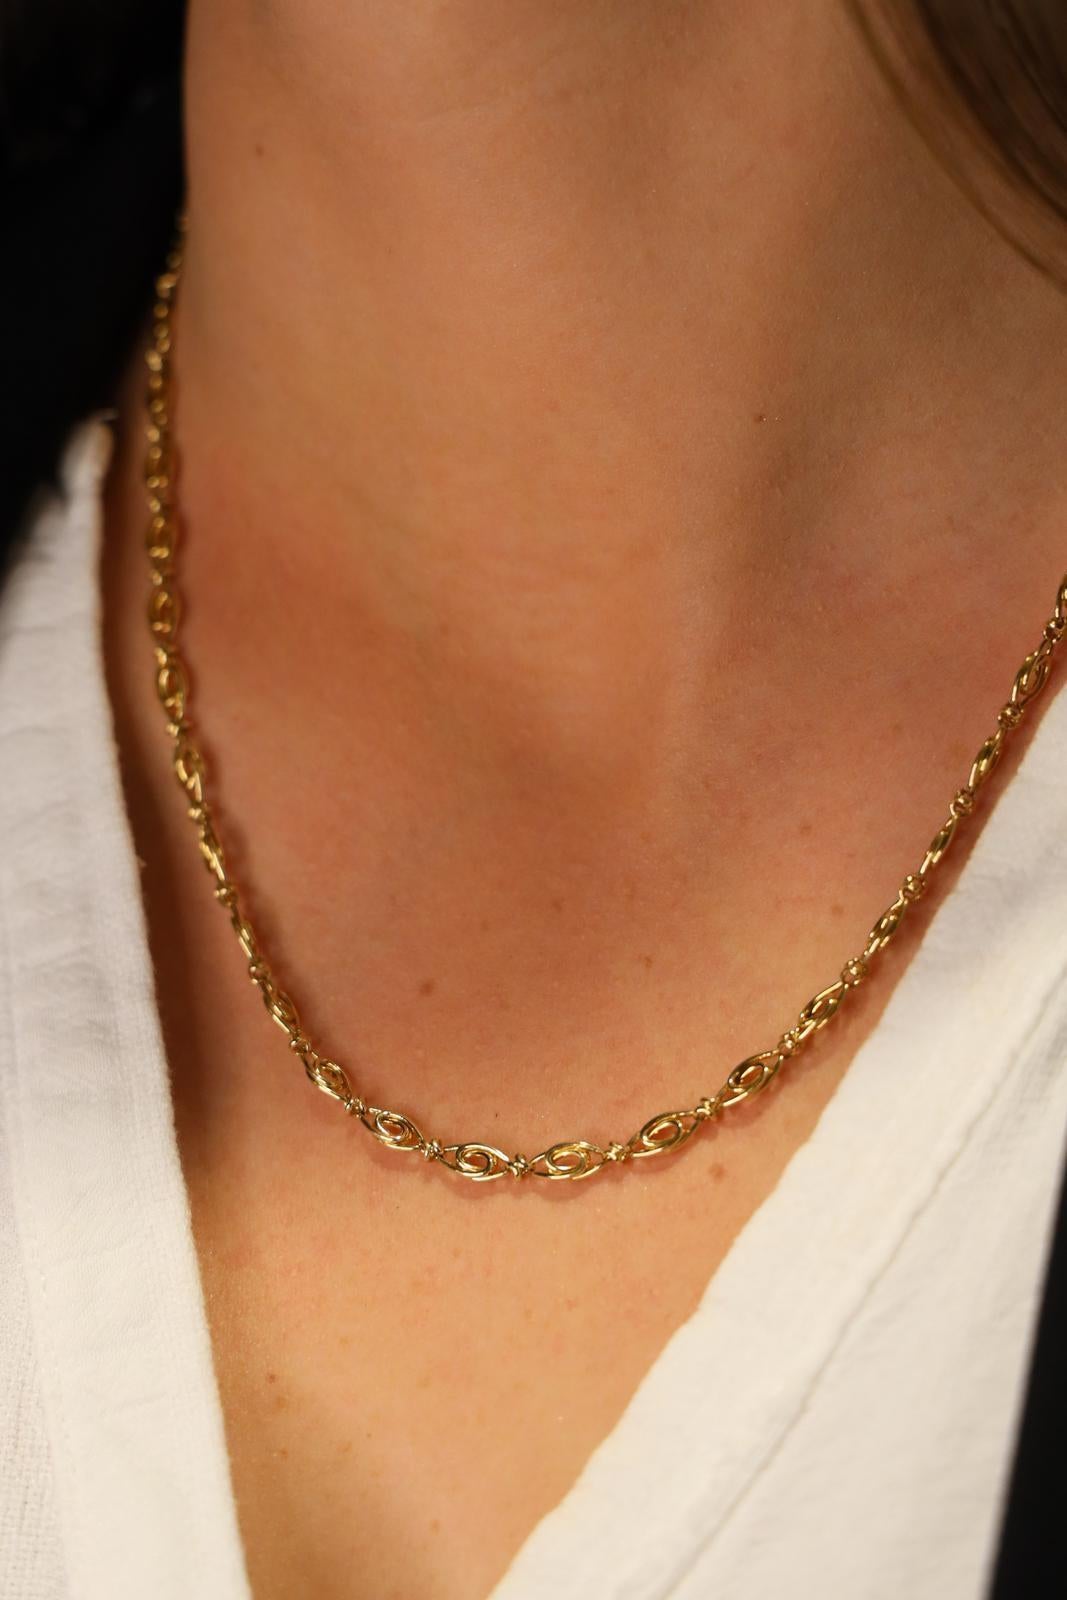 Soft mesh chain in yellow gold 750 thousandths (18 carats). length: 47 cm. width: 0.38 cm. total weight: 14.96 g eagle head hallmark. excellent condition